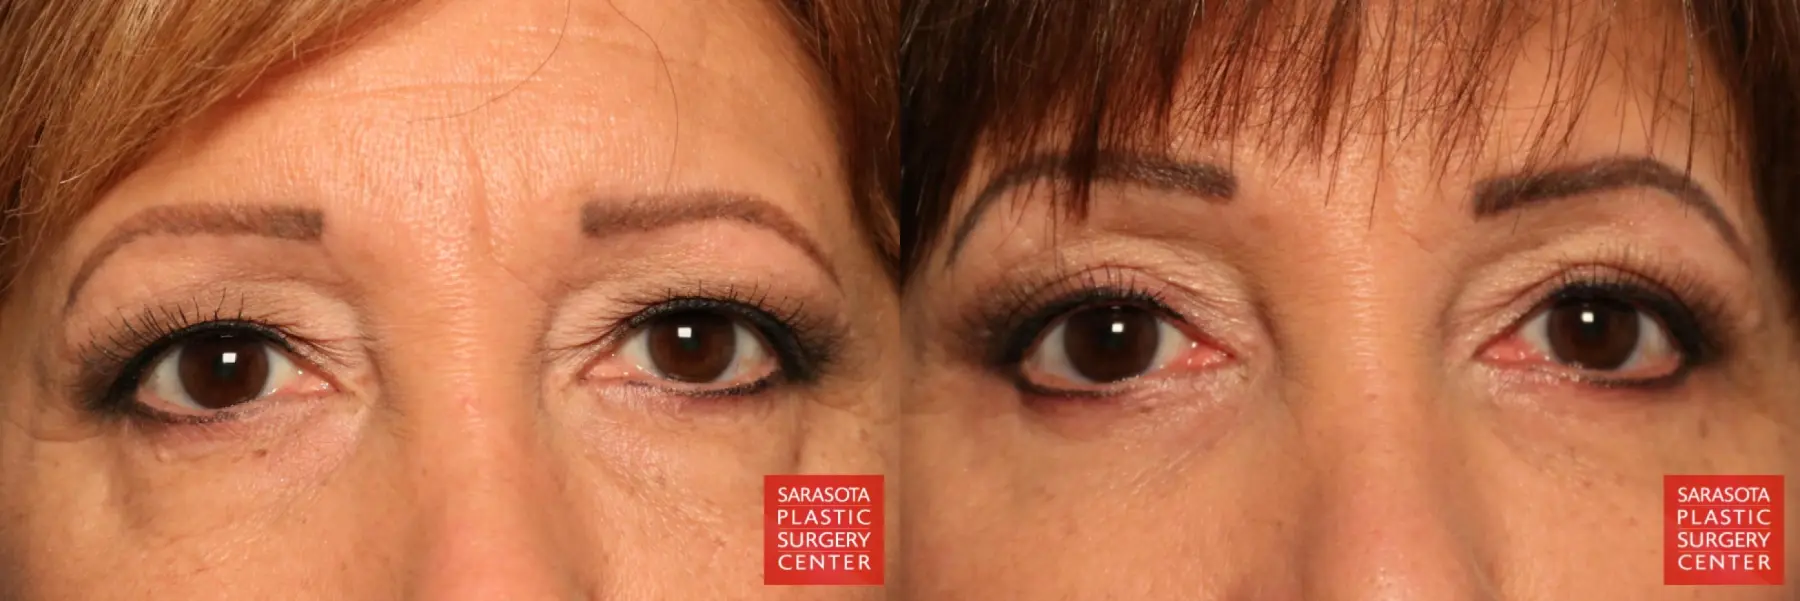 Eyelid Lift: Patient 9 - Before and After 1